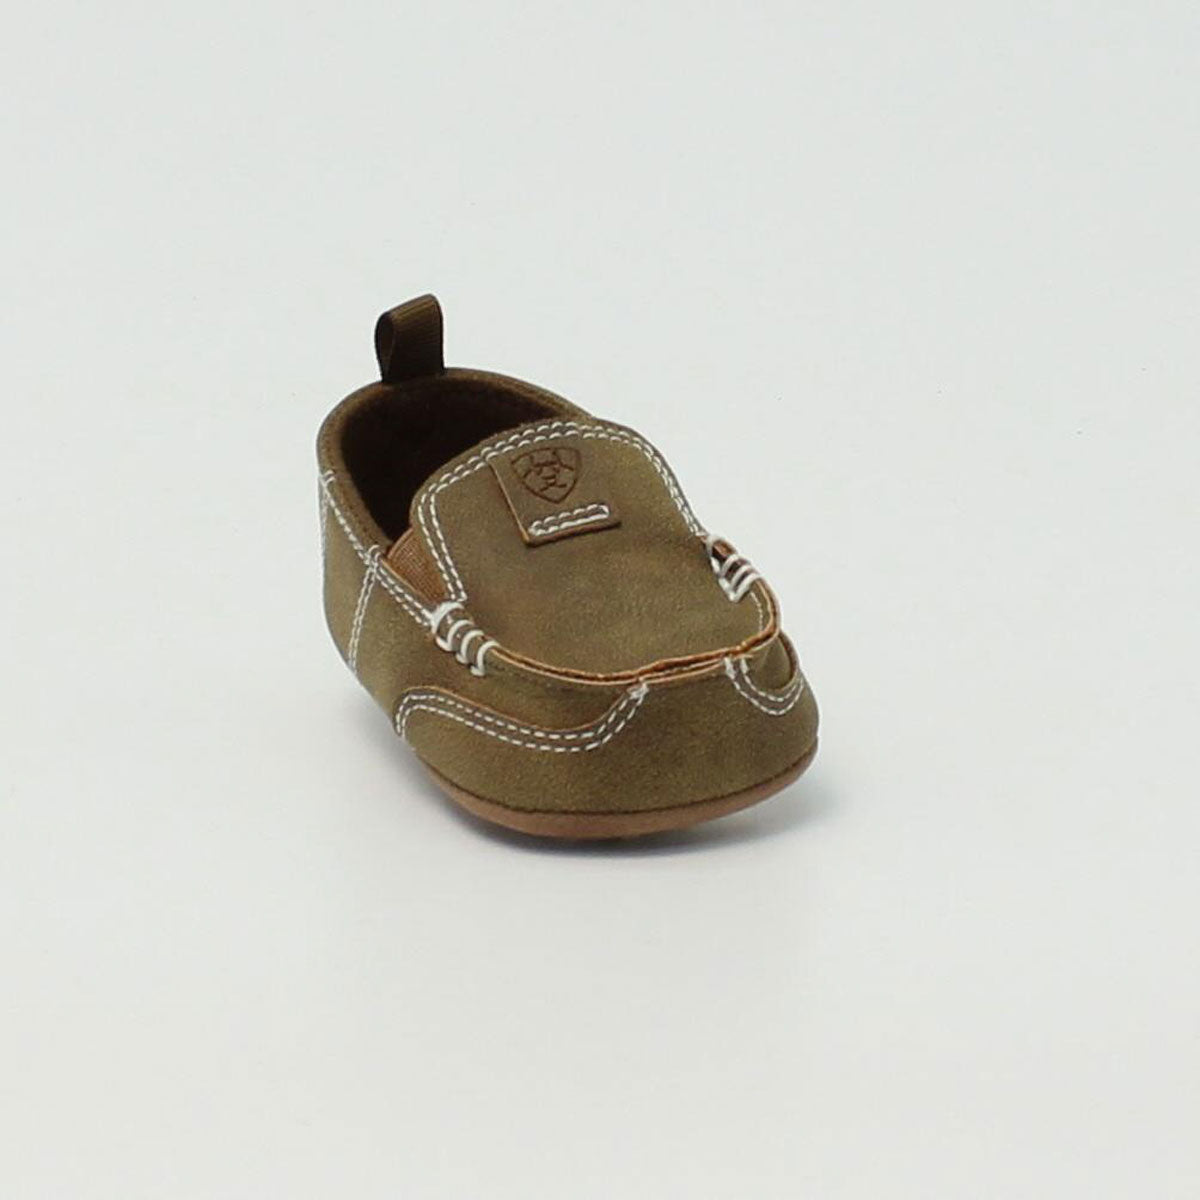 Ariat Infant Boy's Buckskin Lil' Stompers Shoes - Tan